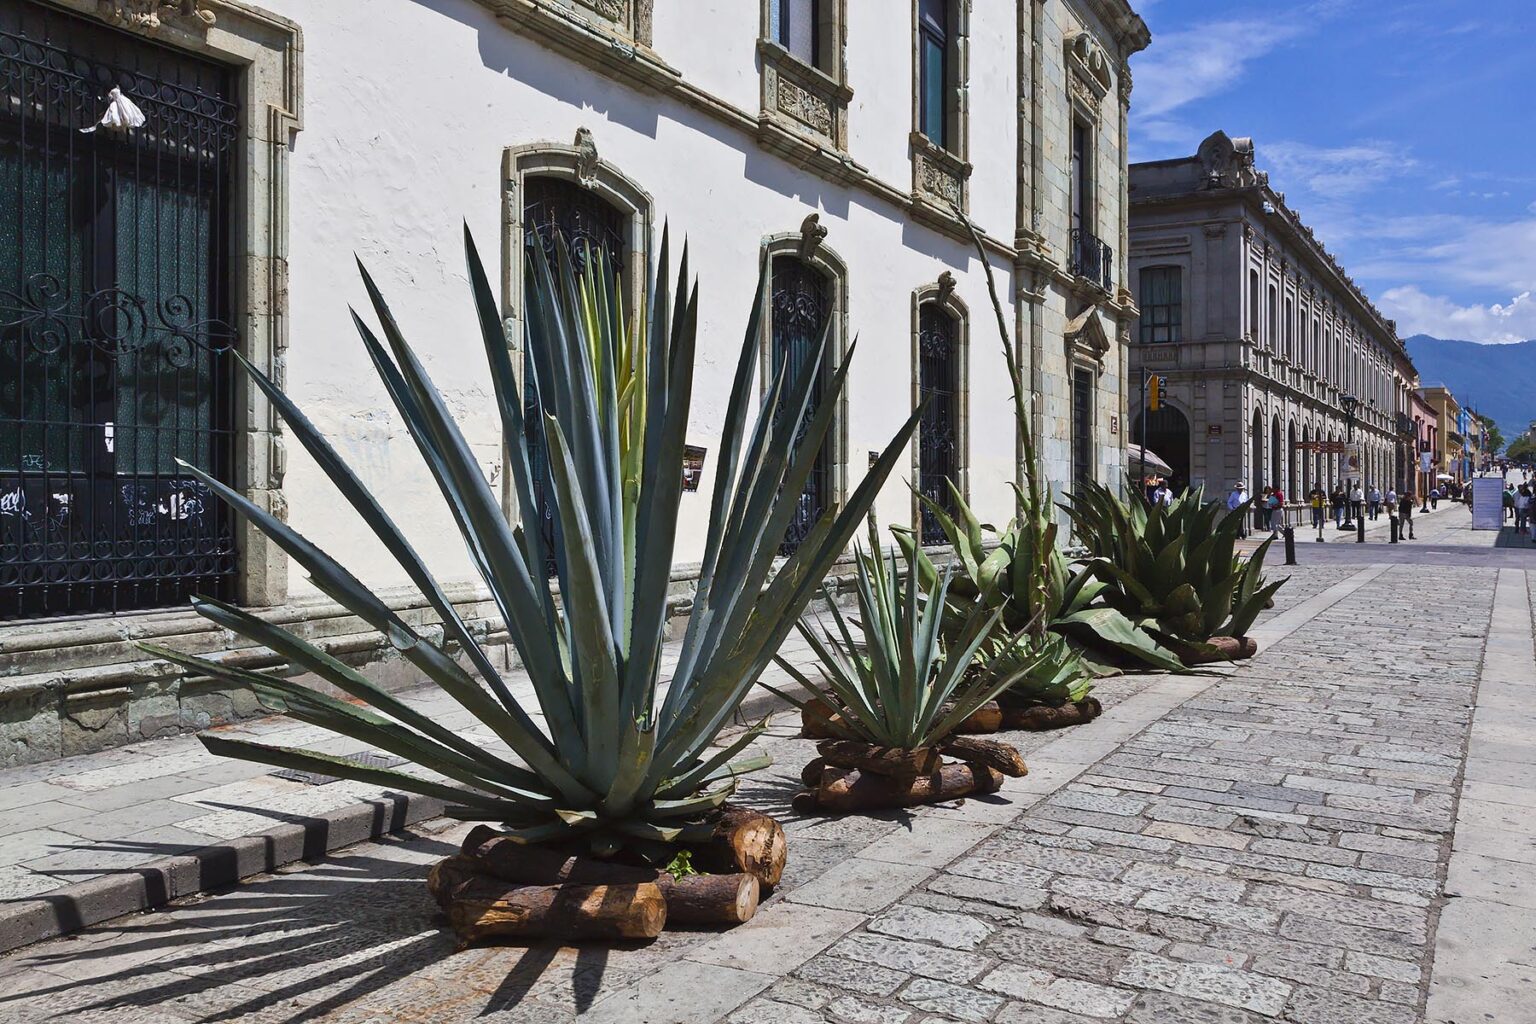 AGAVE CACTUS on display during the GUELAGUETZA FESTIVAL held each year in July - OAXACA, MEXICO